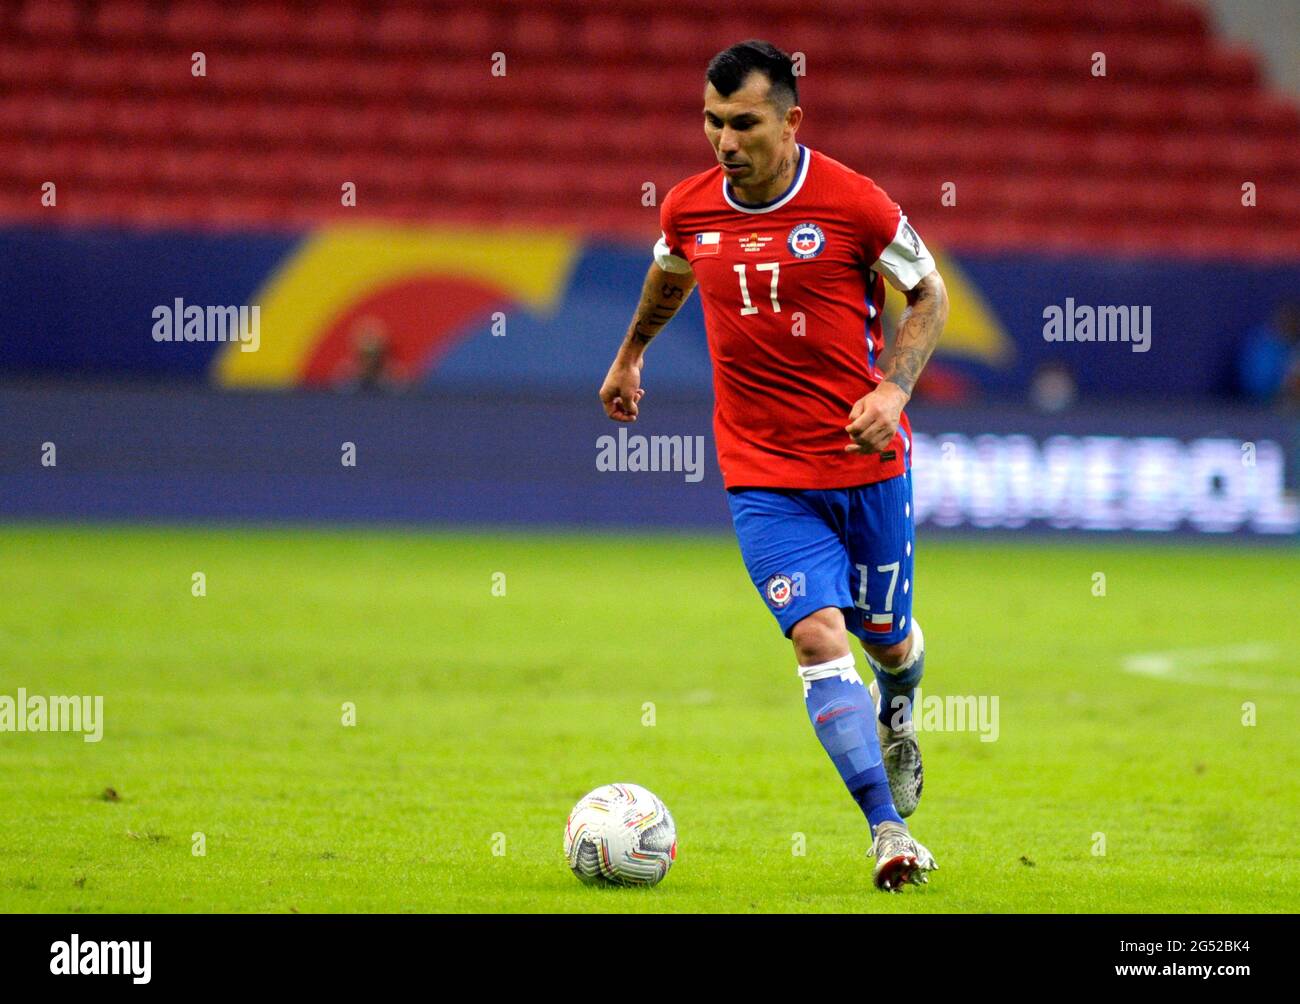 BRASILIA, BRAZIL - JUNE 24: Gary Medel of Chile on action ,during the match between Chile and Paraguay as part of Conmebol Copa America Brazil 2021 at Mane Garrincha Stadium on June 24, 2021 in Brasilia, Brazil. (MB Media) Stock Photo